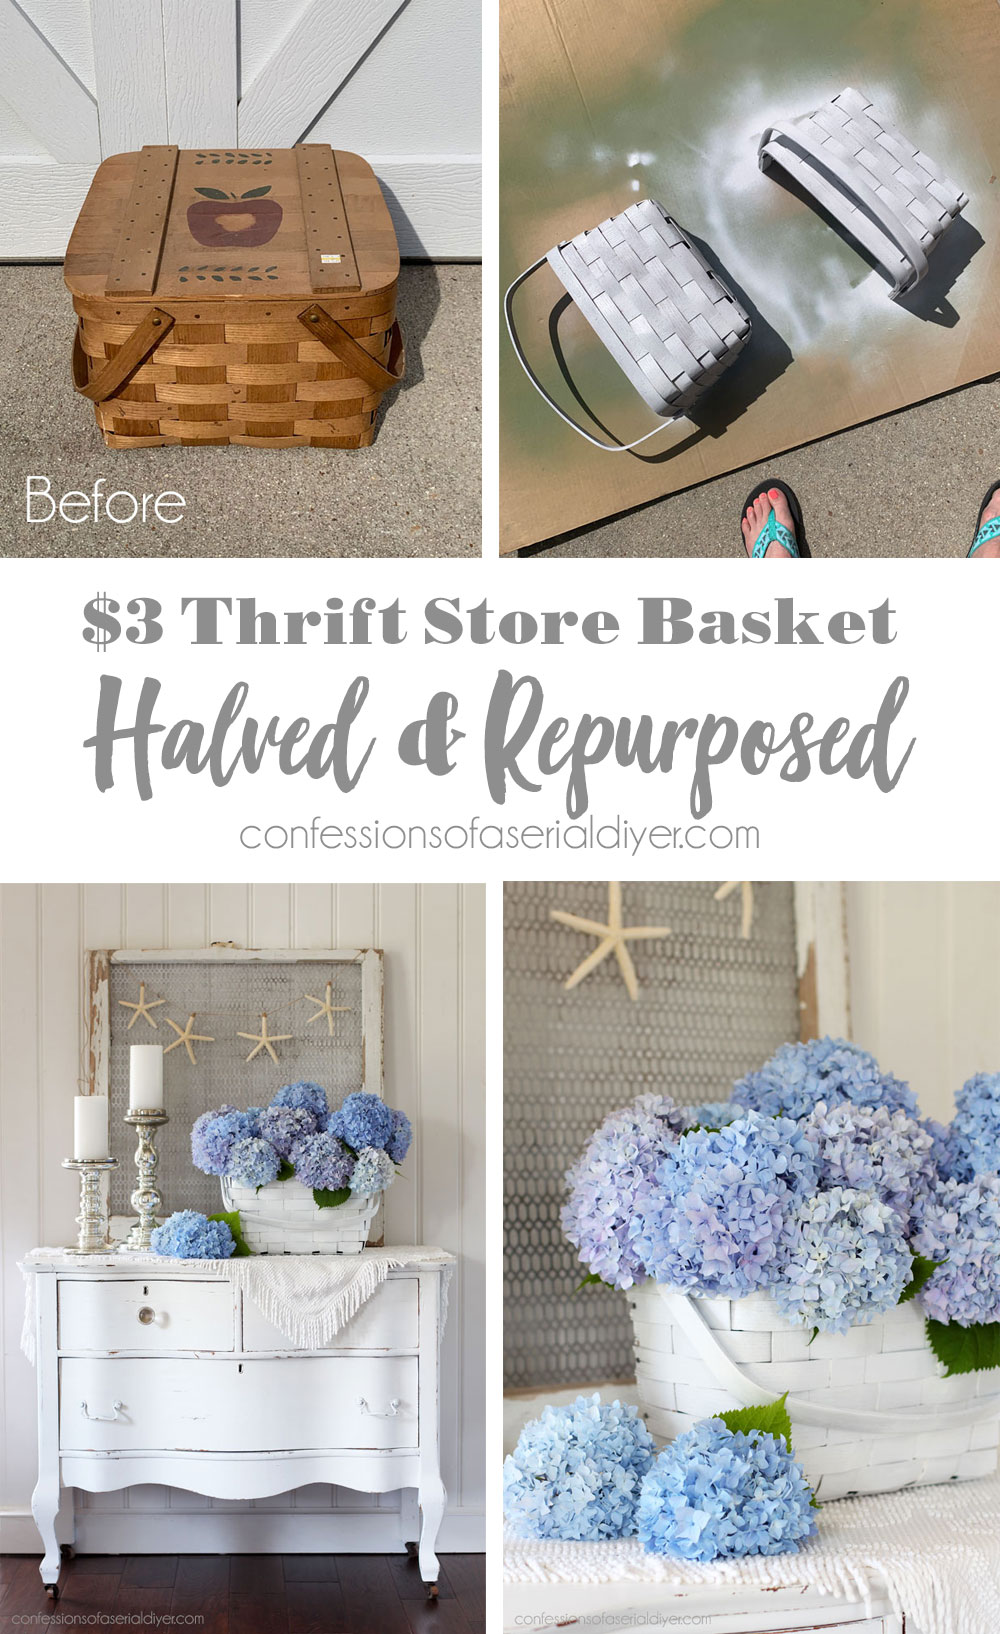 Thrift store basket halved and repurposed!